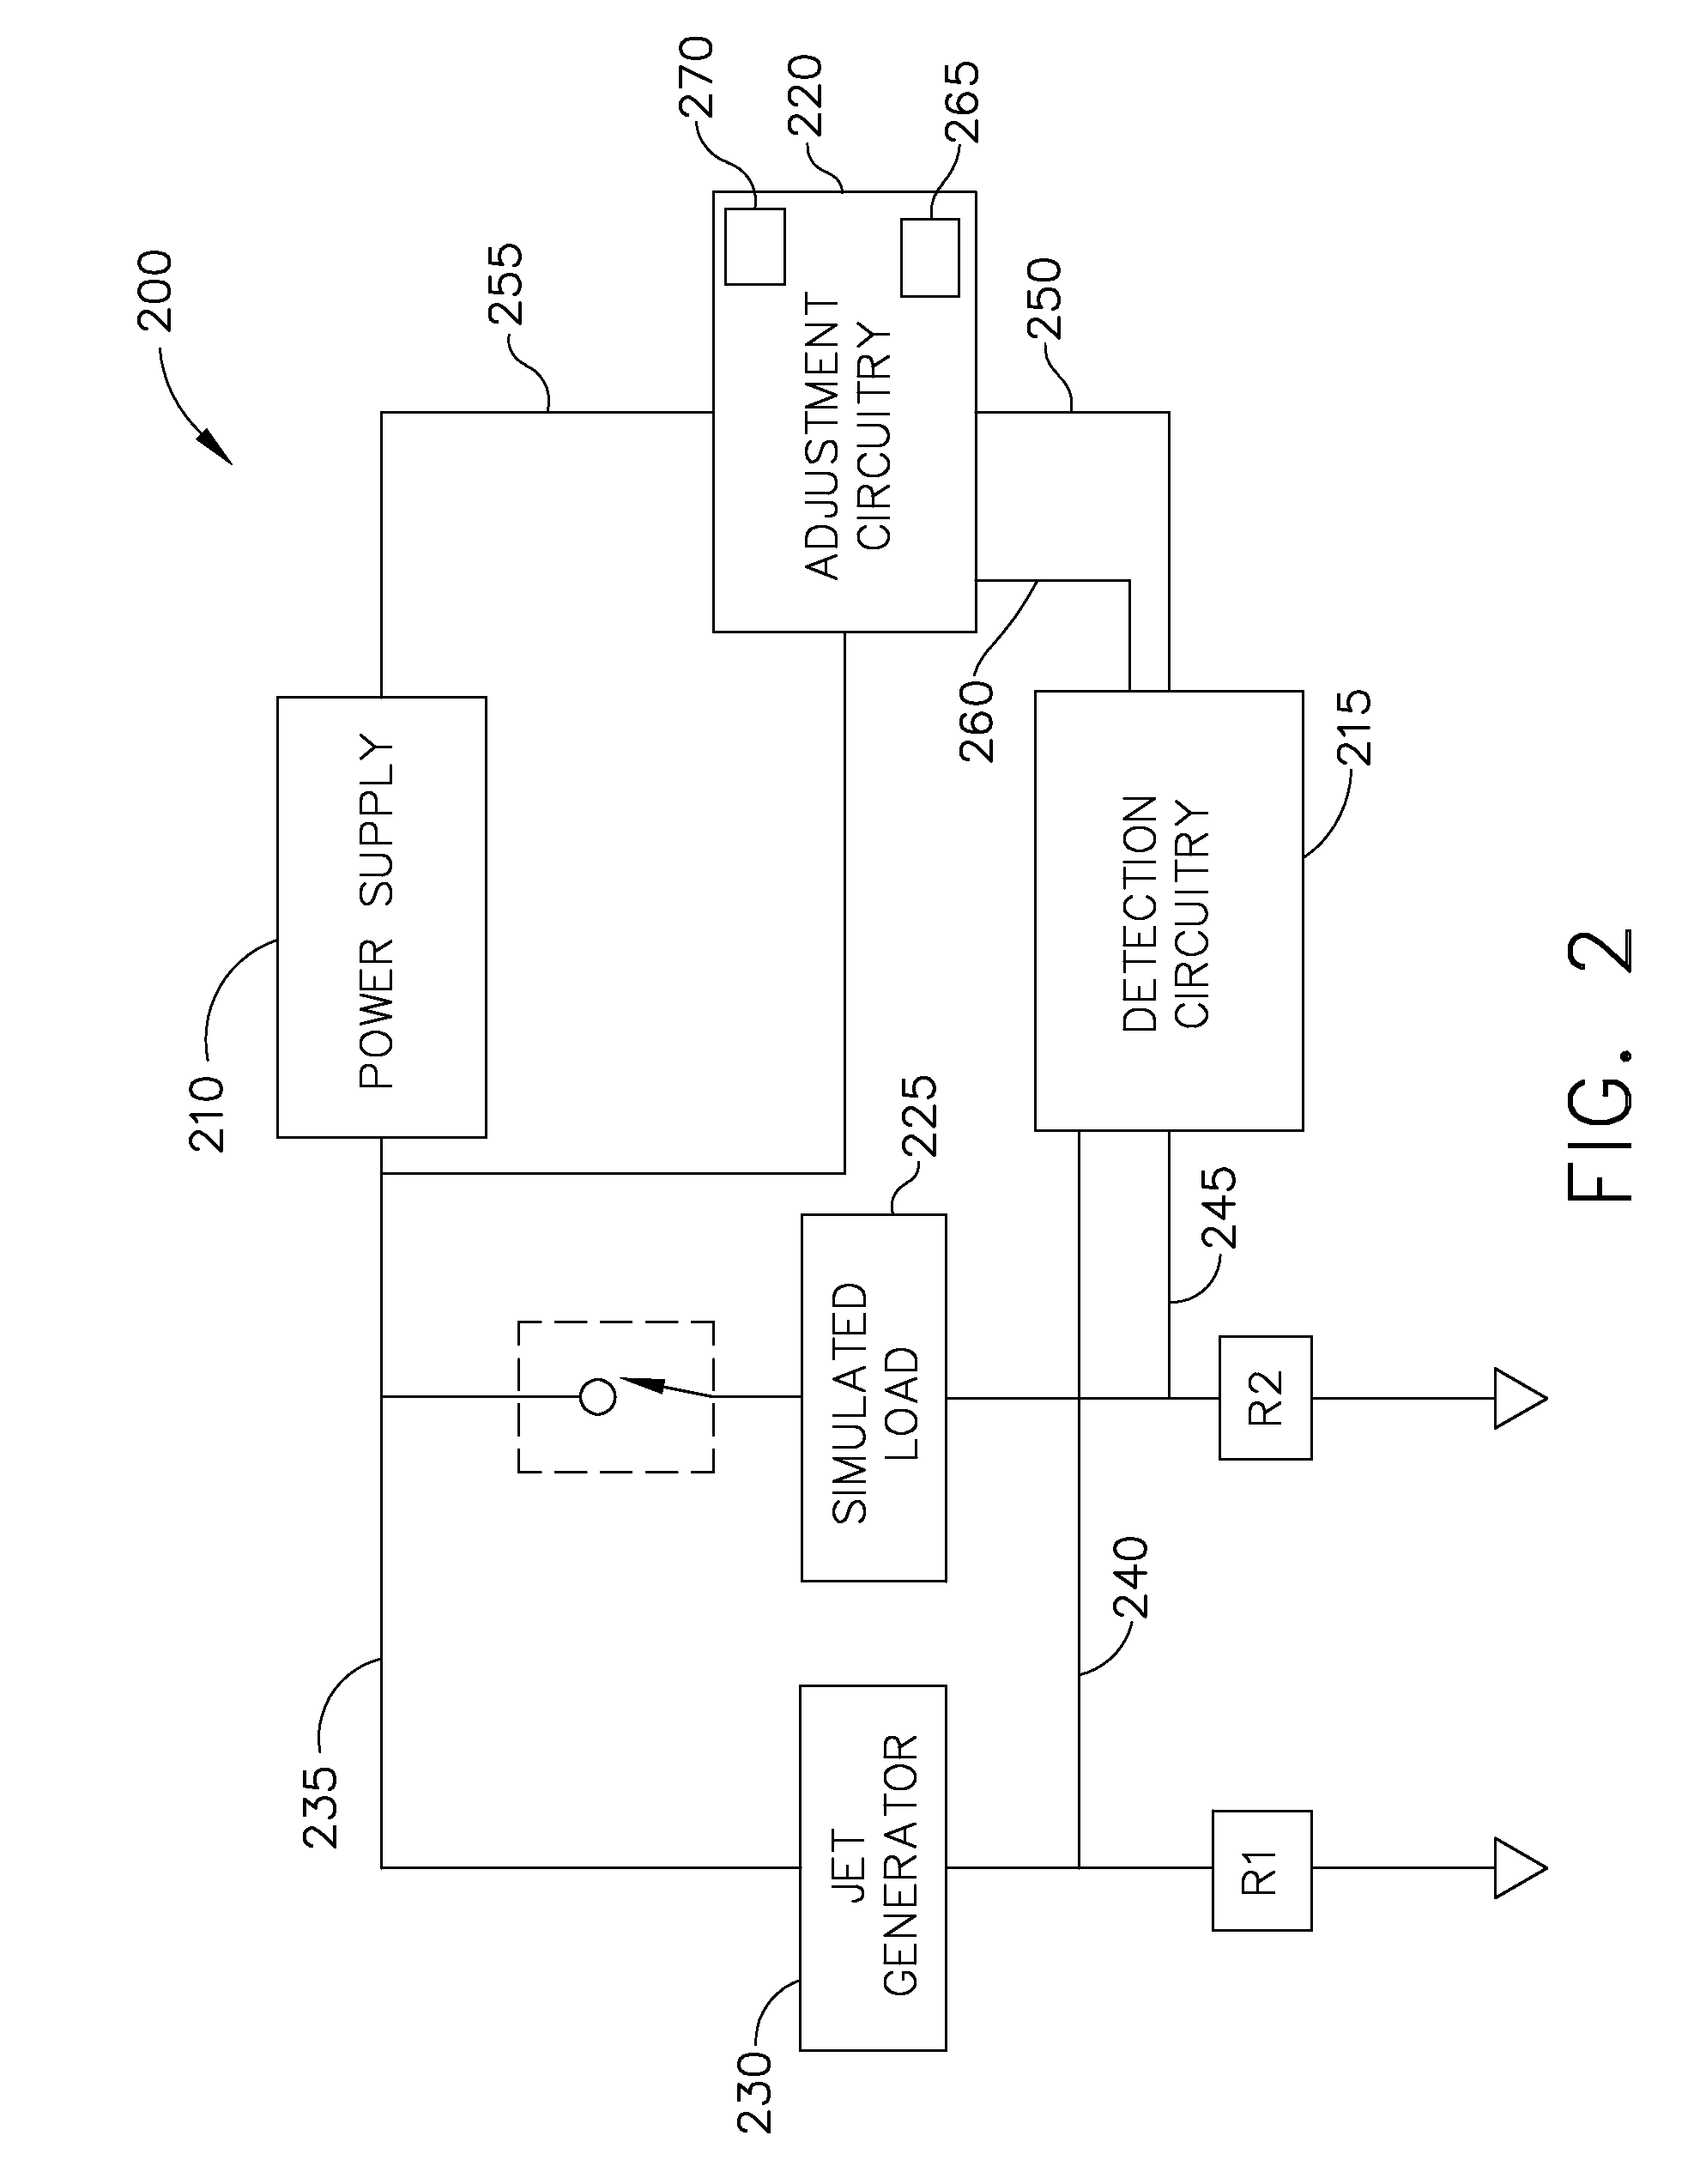 Frequency response and health tracker for a synthetic jet generator